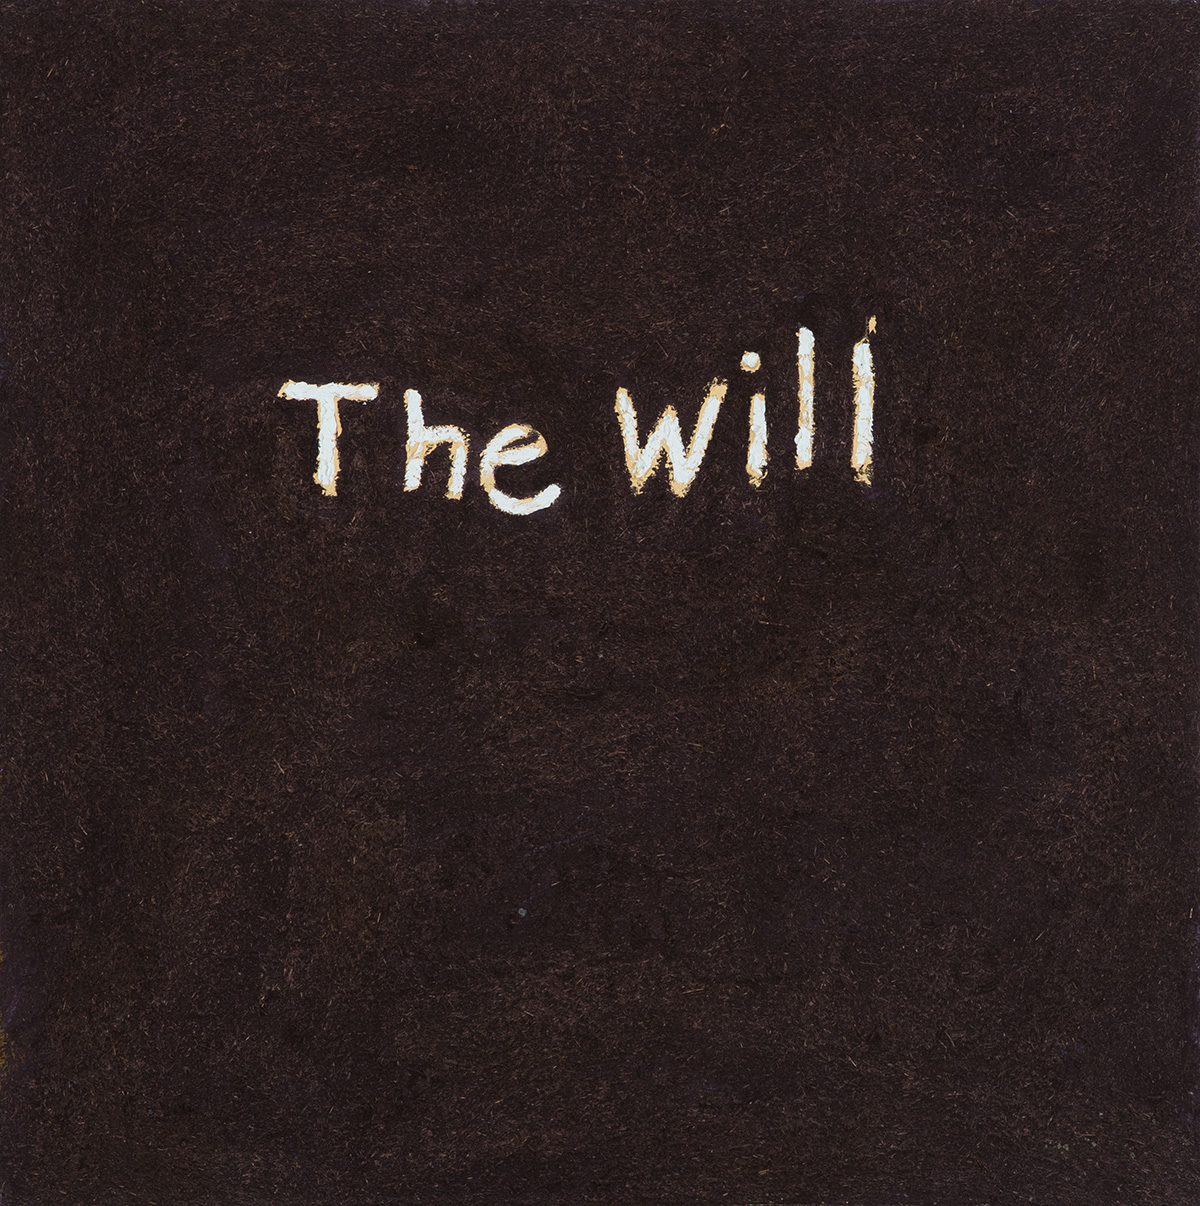  - The Will, 2015